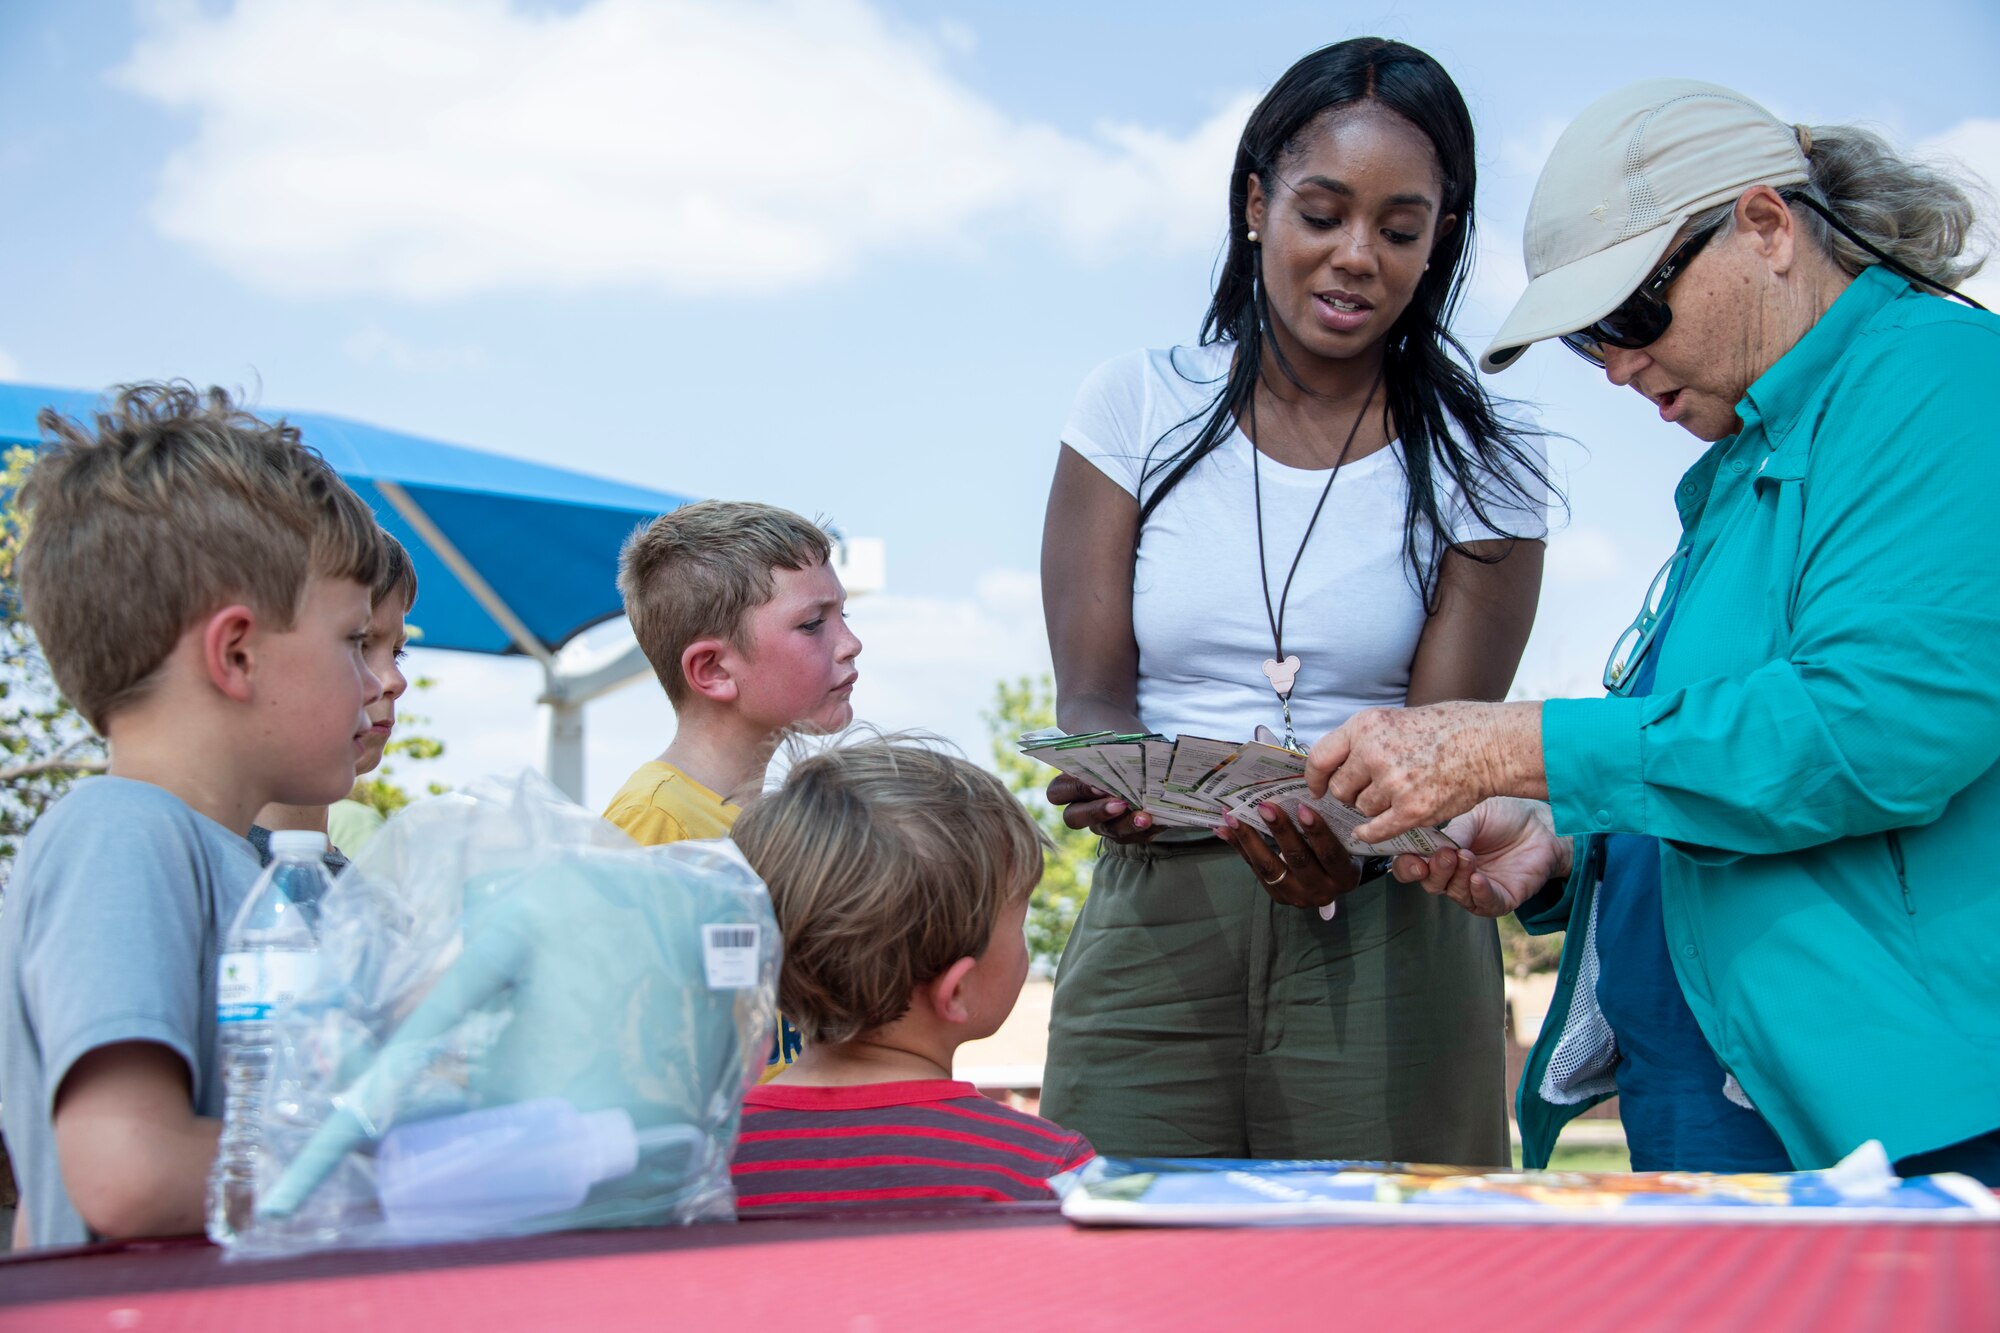 Cherrell Williams, 97th Force Support Squadron exceptional family member, (center) helps Altus families select seeds during a garden workshop at Altus Air Force Base, Oklahoma, June 25, 2021. The workshop was held in preparation for the opening of the community garden to educate families on what they can grow. (U.S. Air Force photo by Staff Sergeant Cody Dowell)